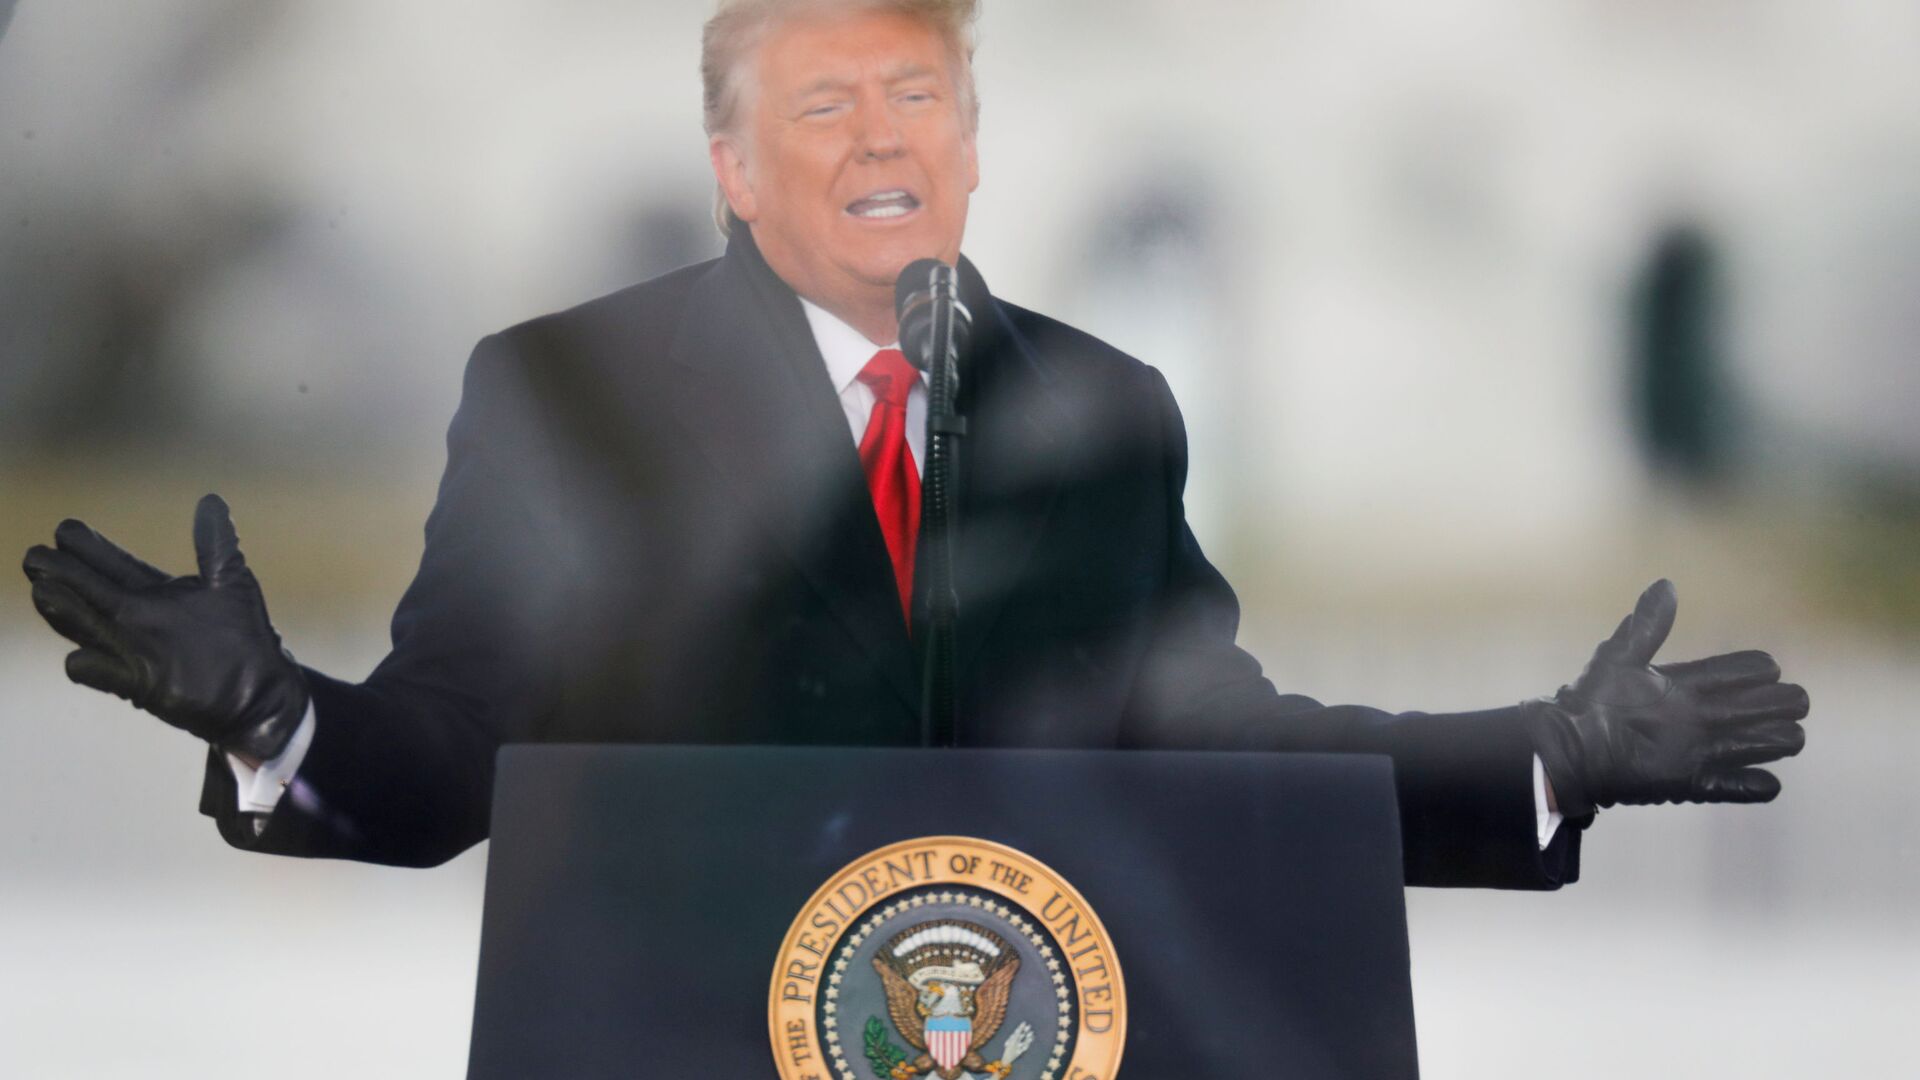 U.S. President Donald Trump speaks during a rally to contest the certification of the 2020 U.S. presidential election results by the U.S. Congress, in Washington, U.S, January 6, 2021. REUTERS/Jim Bourg/File Photo - Sputnik International, 1920, 29.12.2021